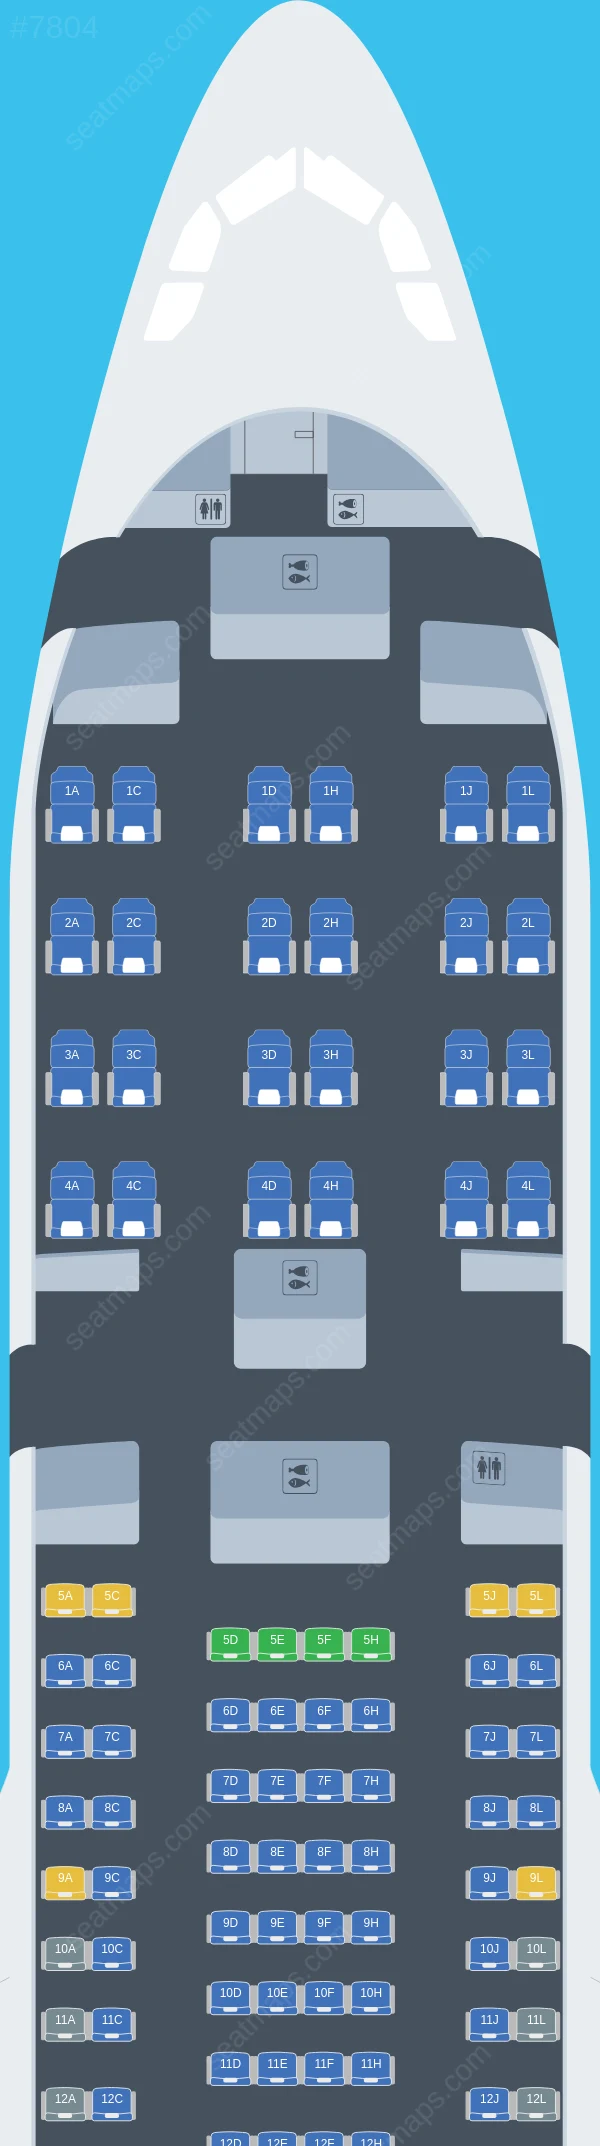 Sichuan Airlines Airbus A330-200 seatmap preview